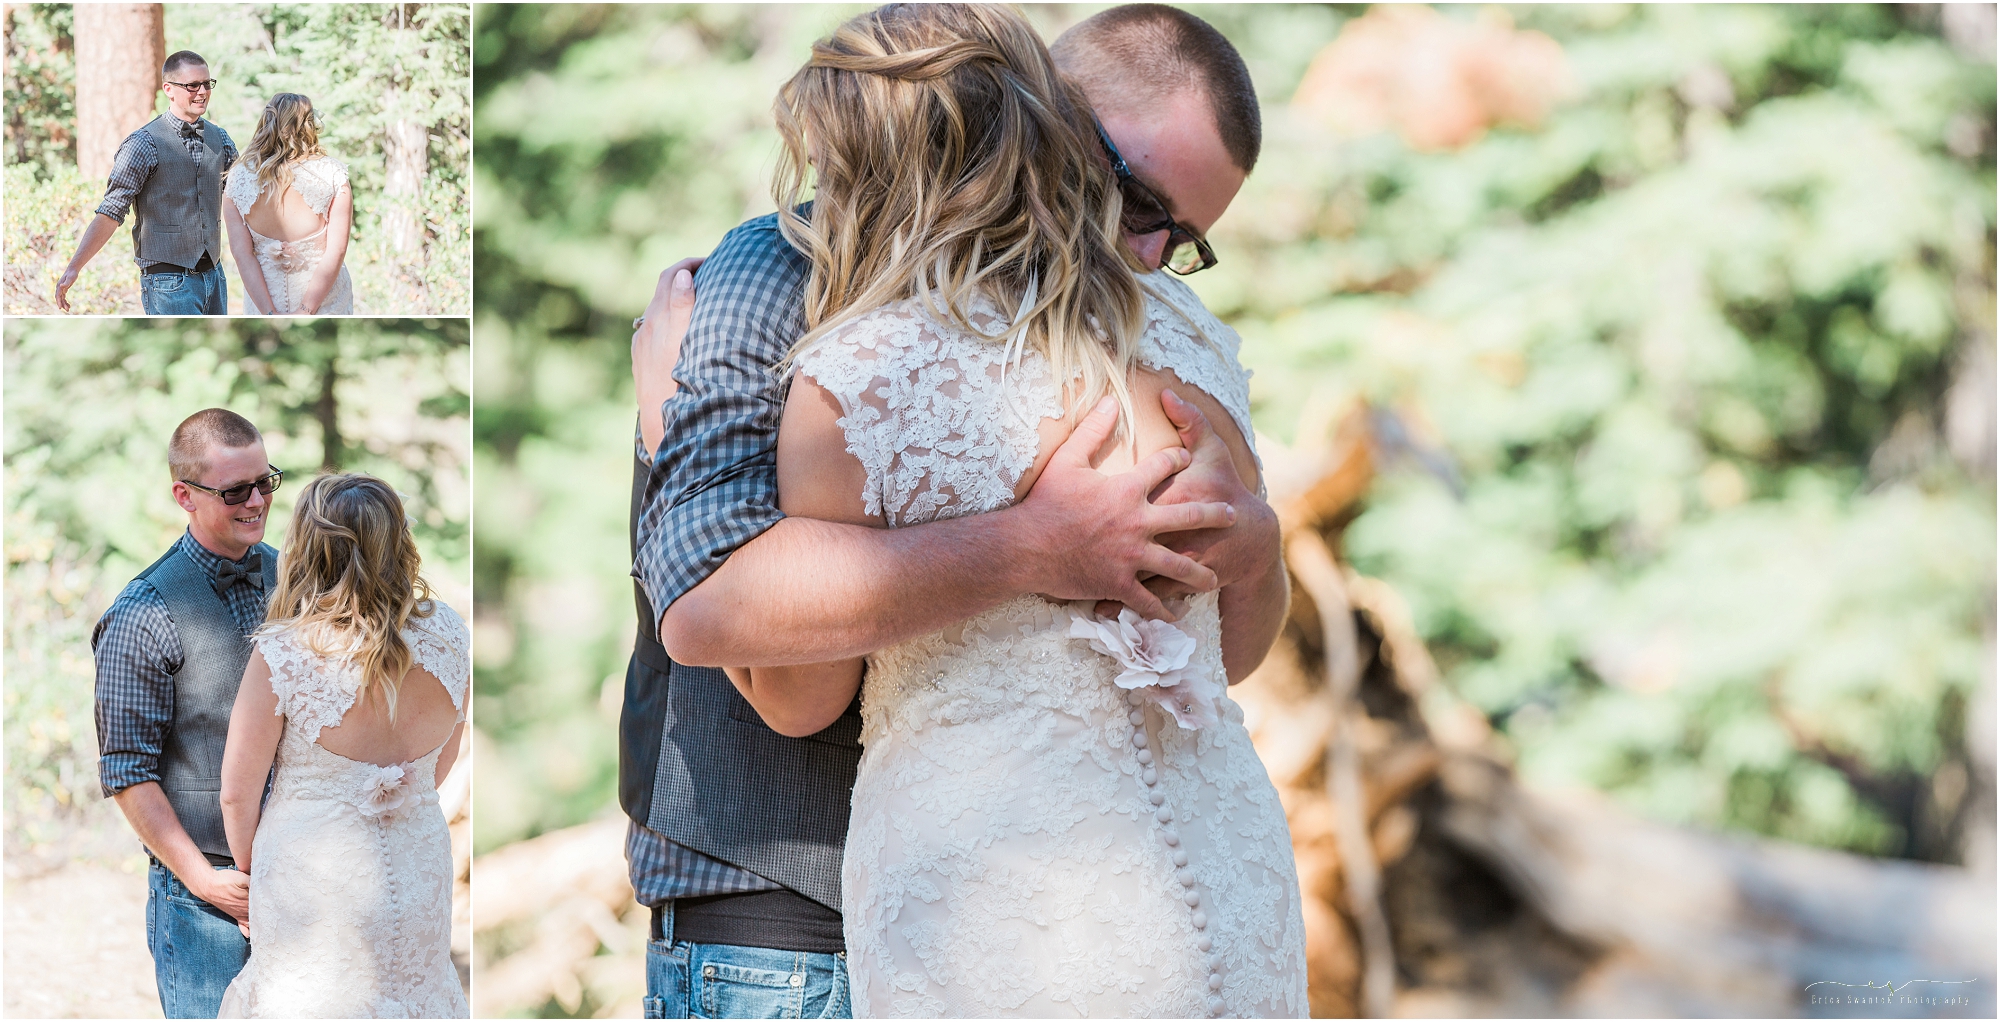 A groom embraces his bride when he sees her for the first time at this rustic Oregon lodge wedding in Bend, Oregon. 